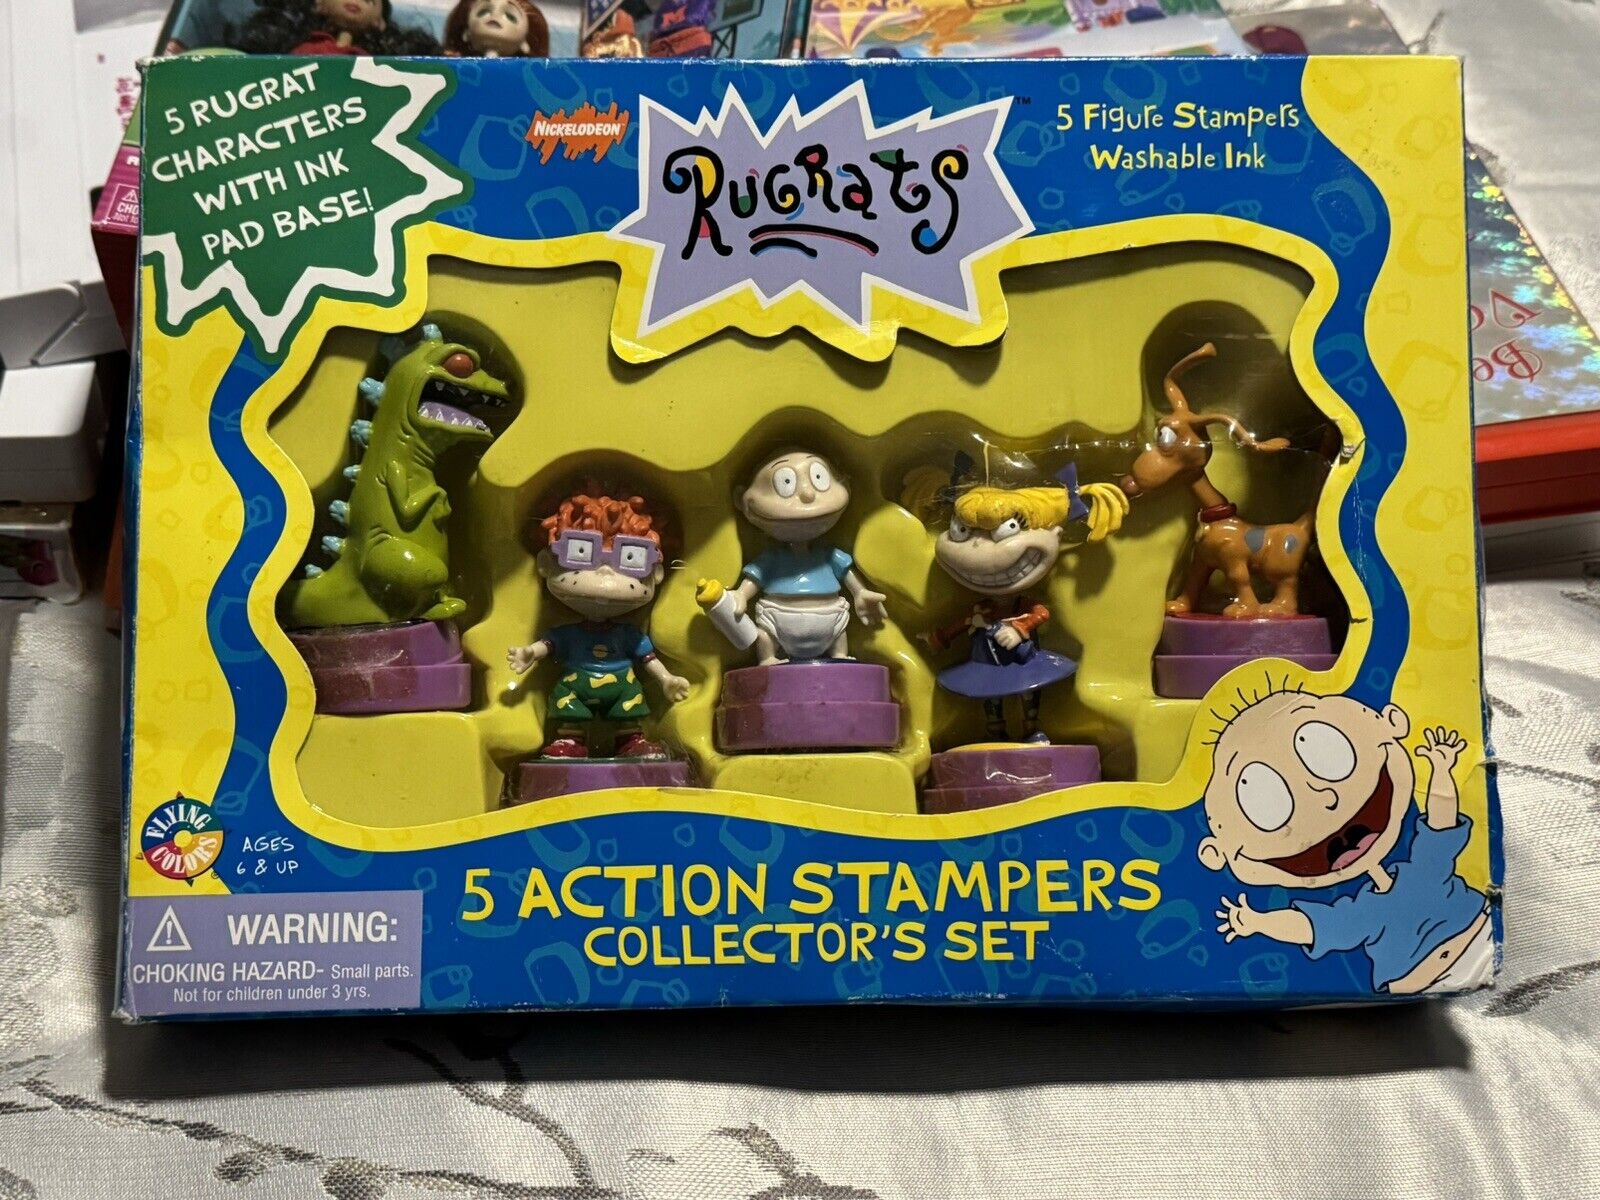 Vintage 1997 Rugrats 5 Action Stampers Collectors Set With Box